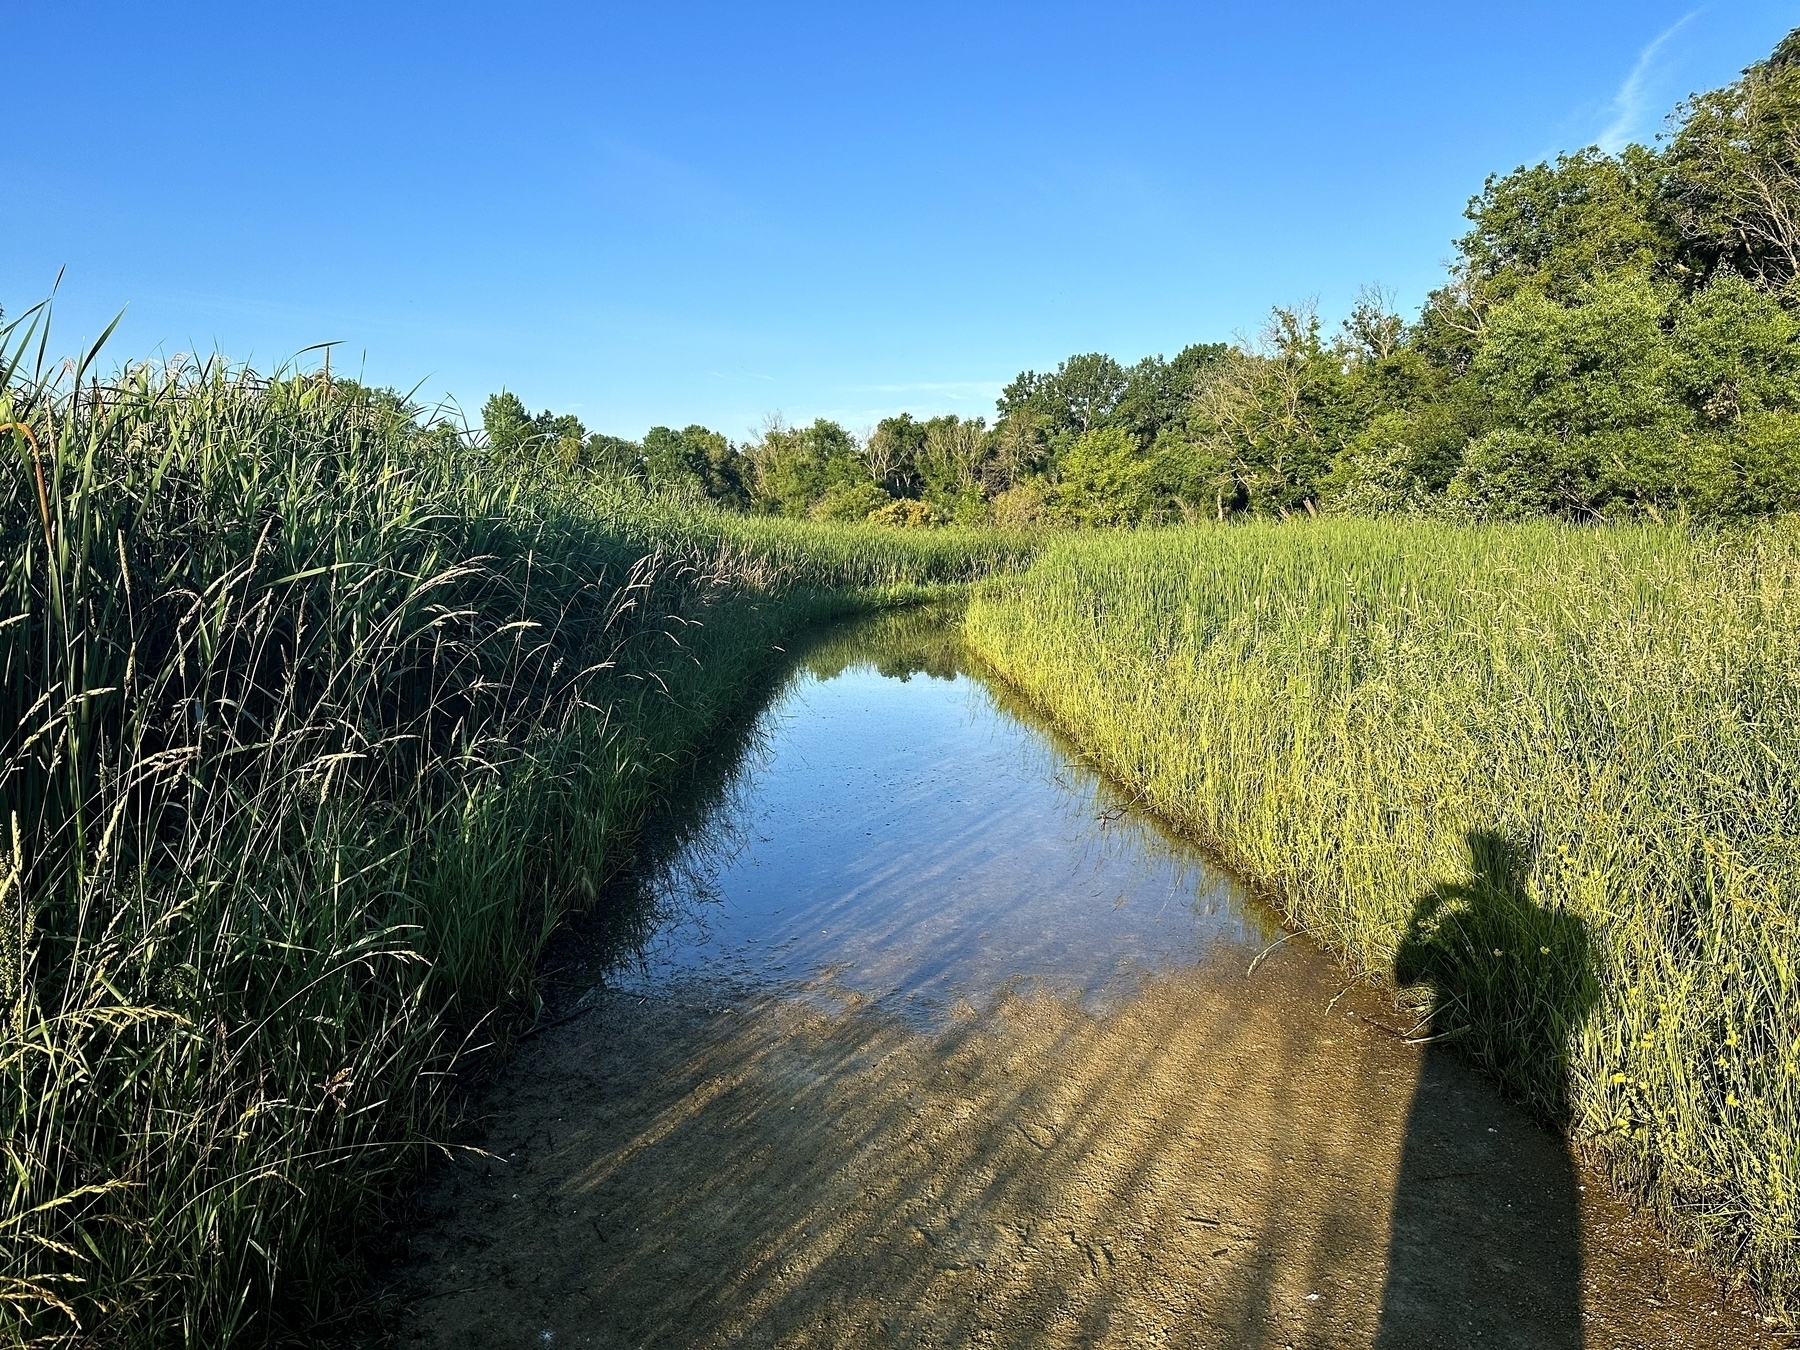 A narrow water stream reflects the blue sky while surrounded by tall green grass and dense trees with a person’s shadow visible on the right side.